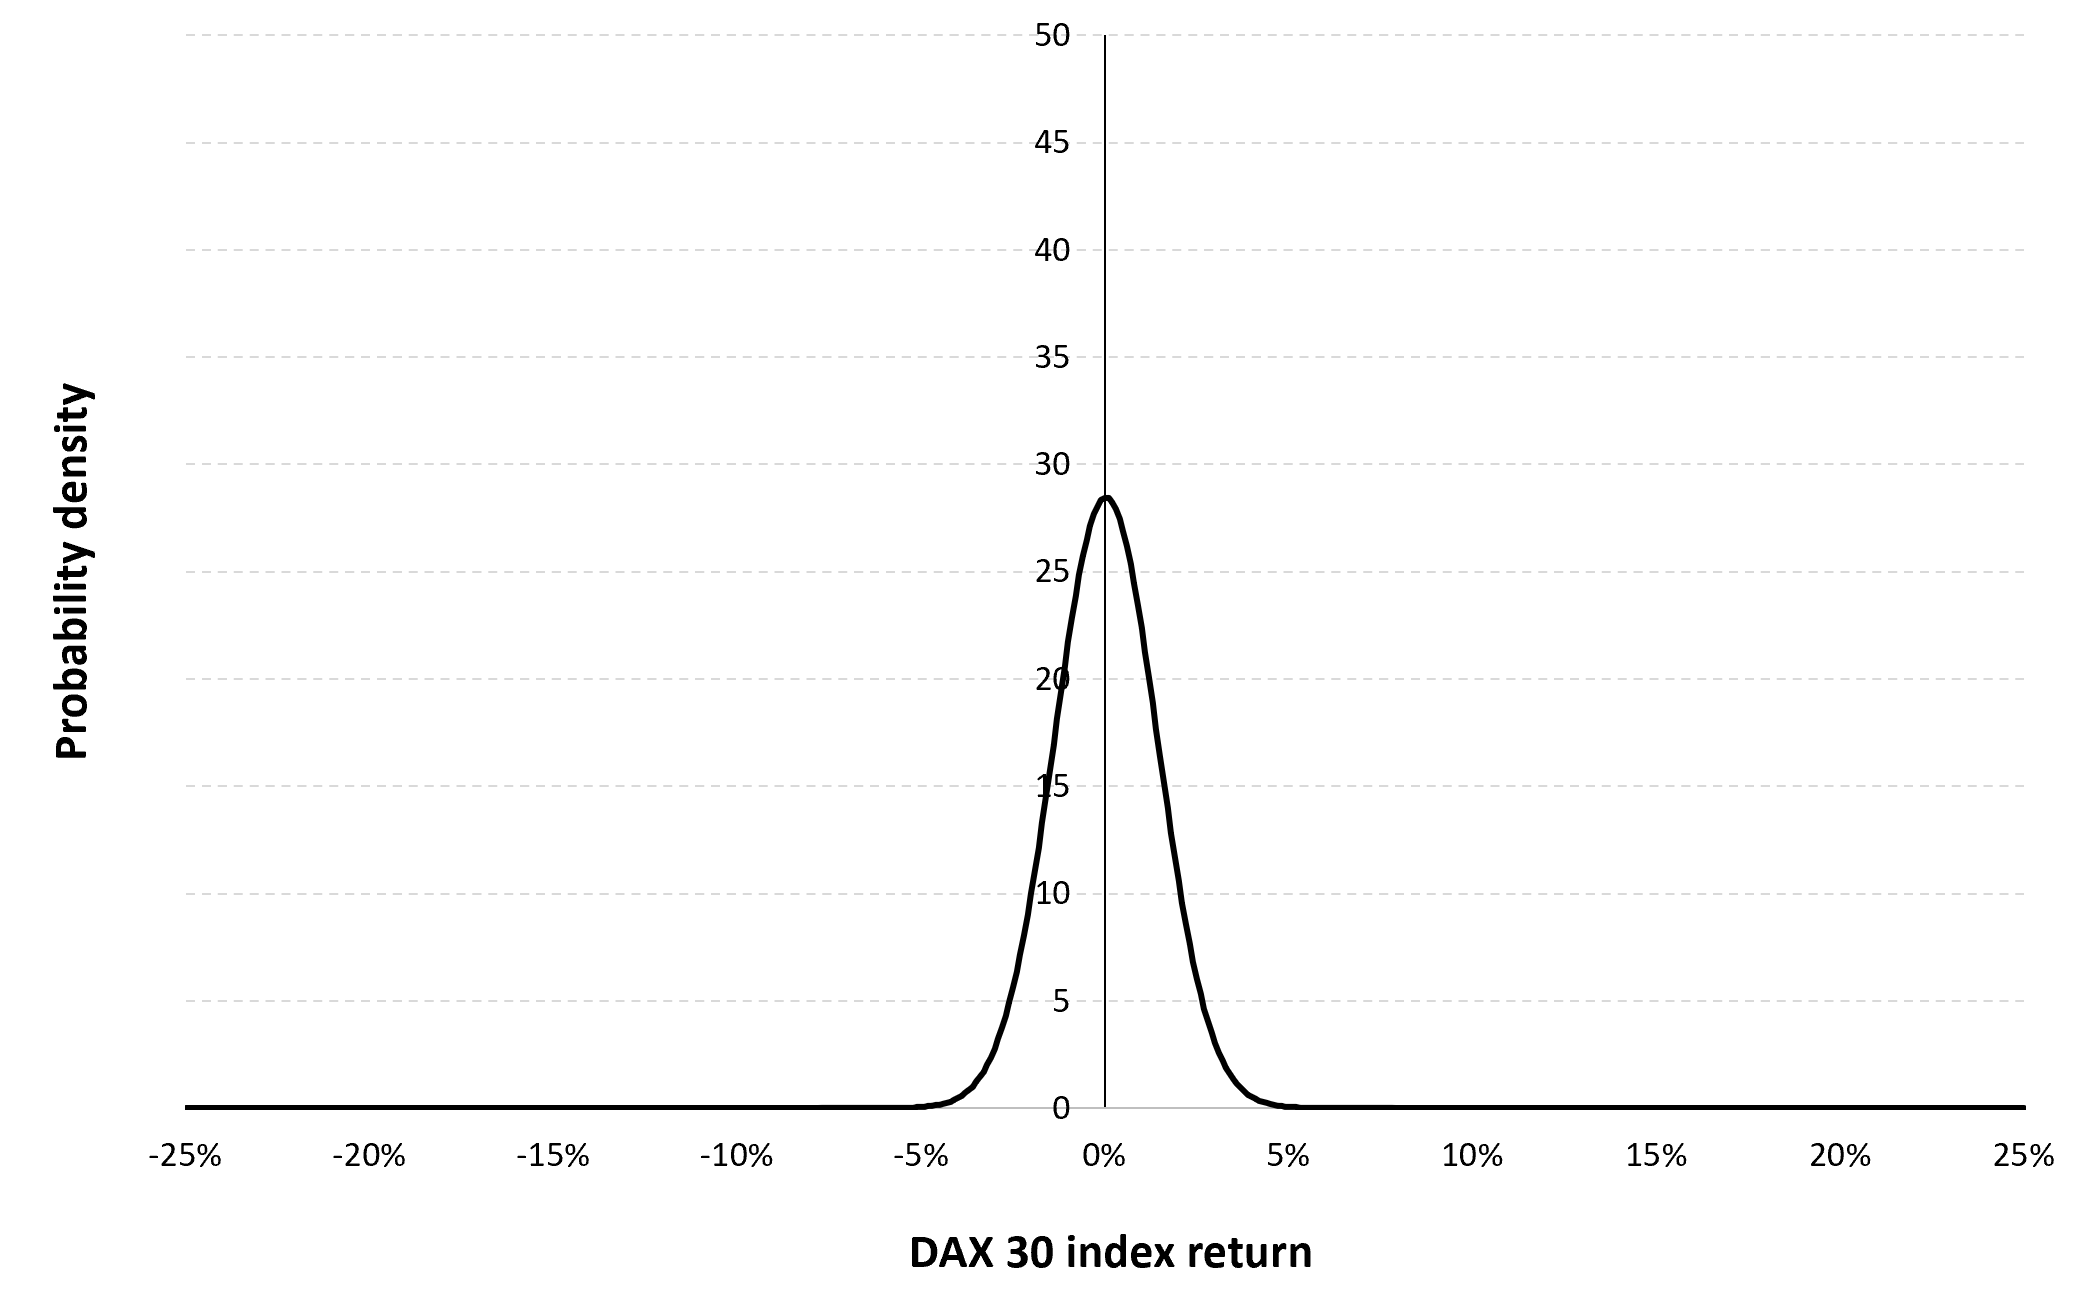 Gaussian distribution of the daily DAX 30 index returns